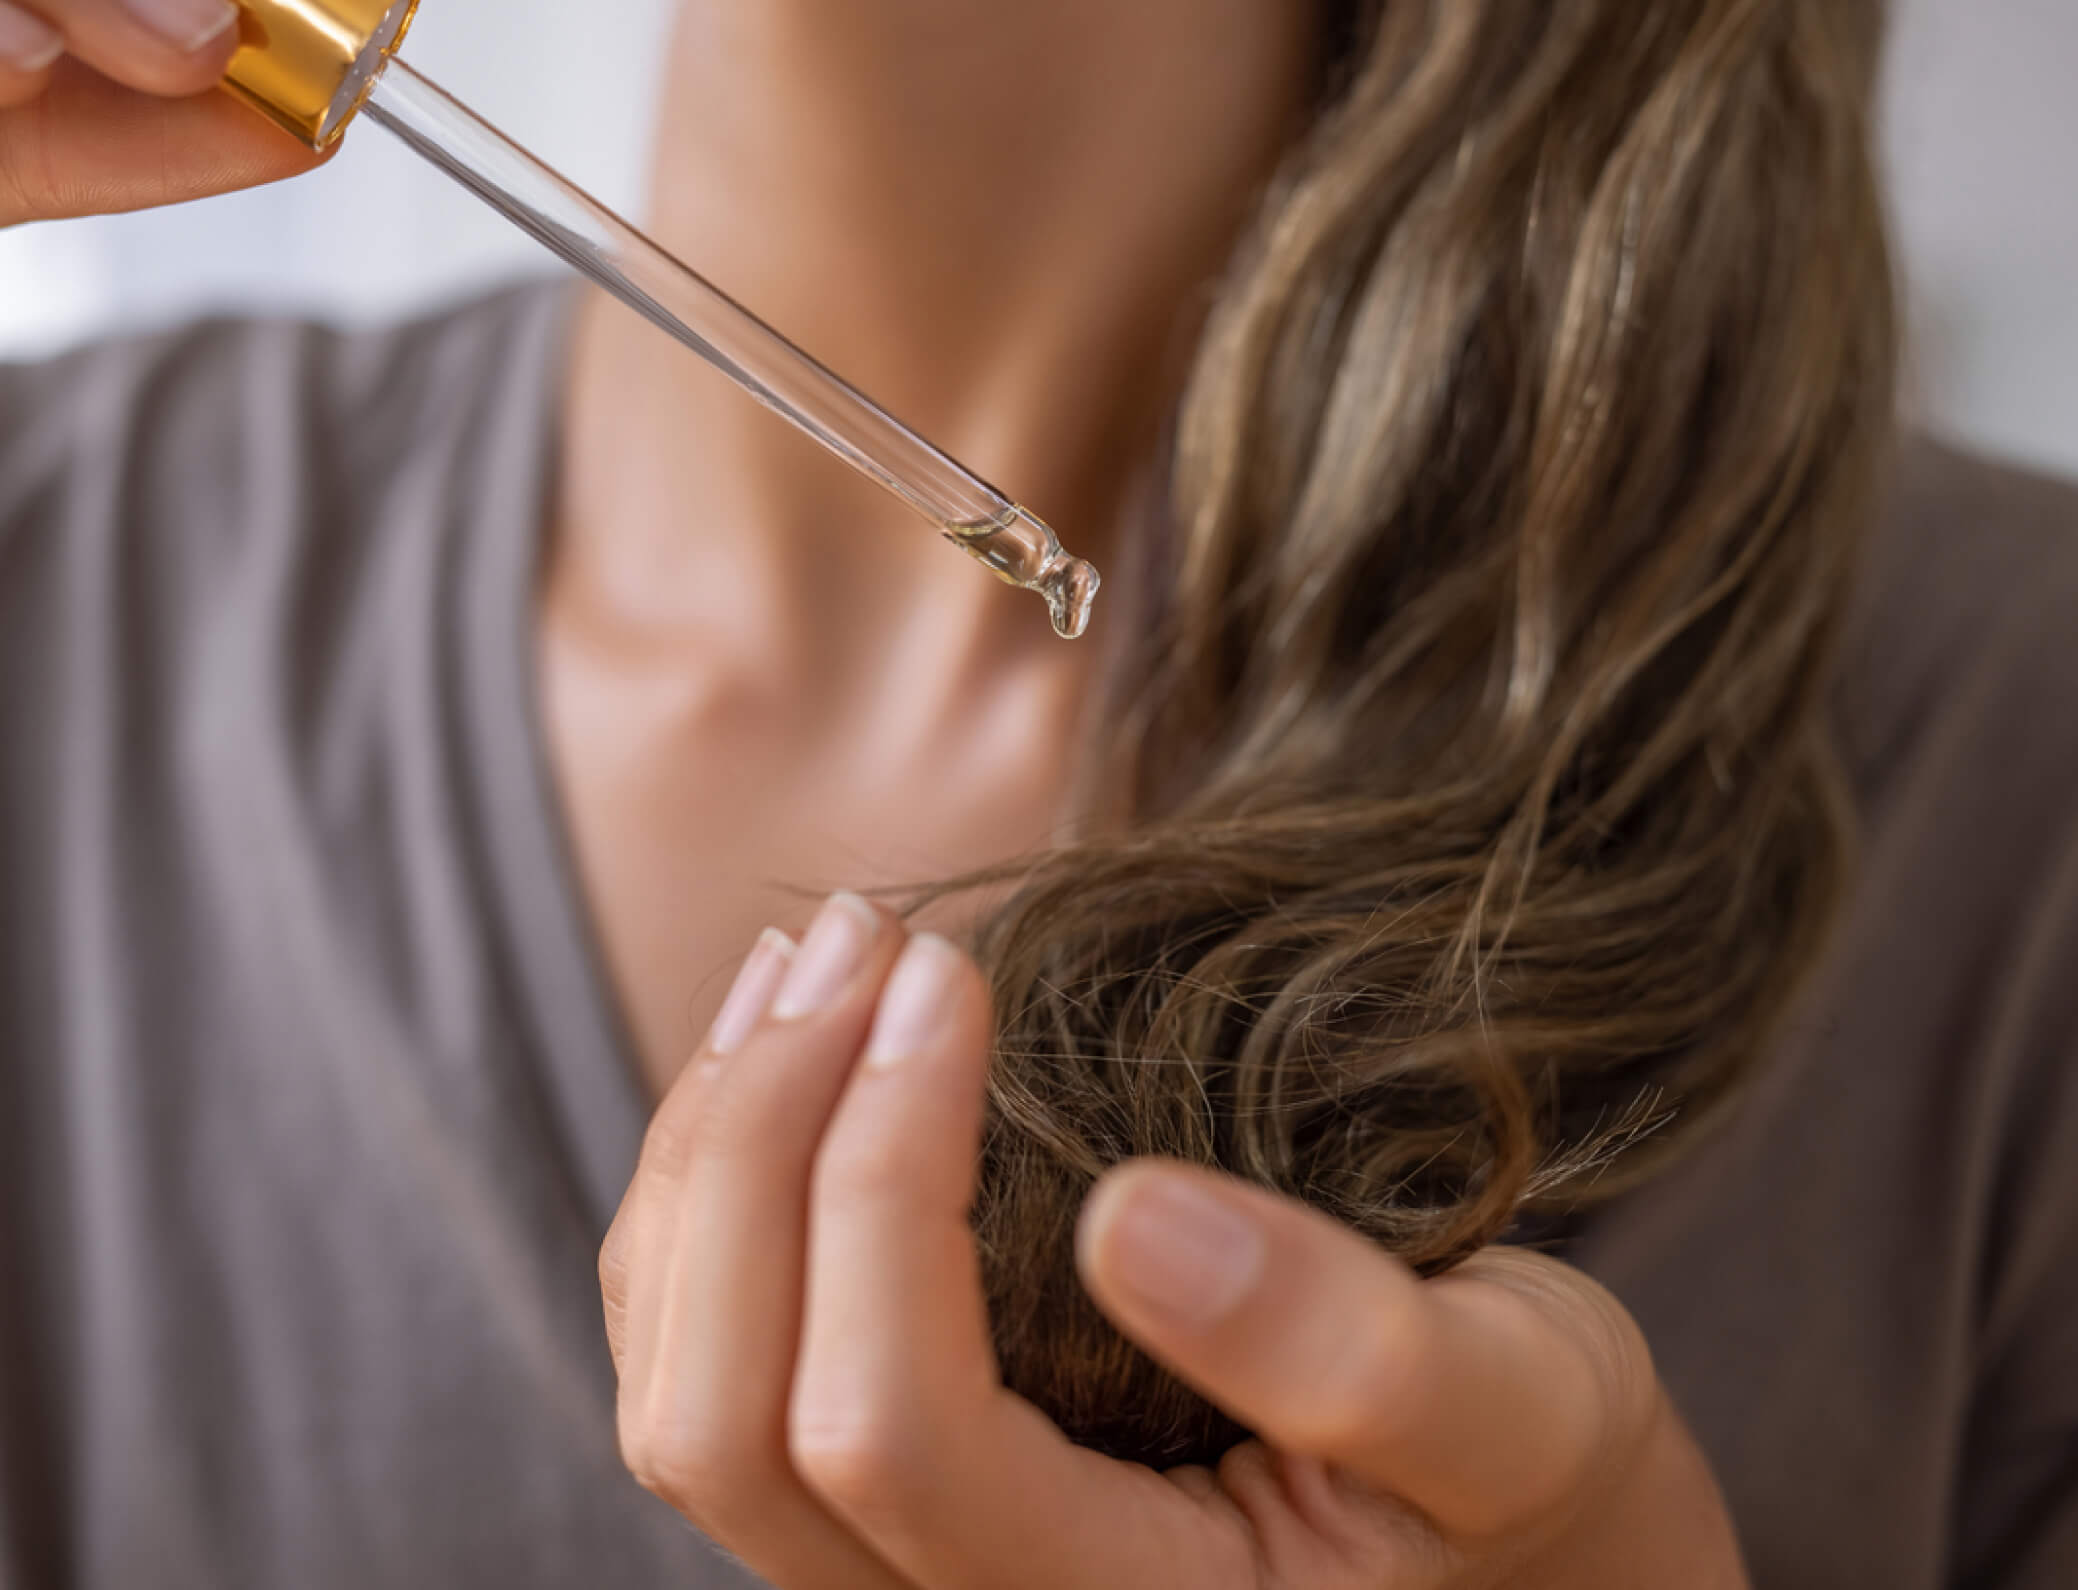 Hair care product drops being applied to hair